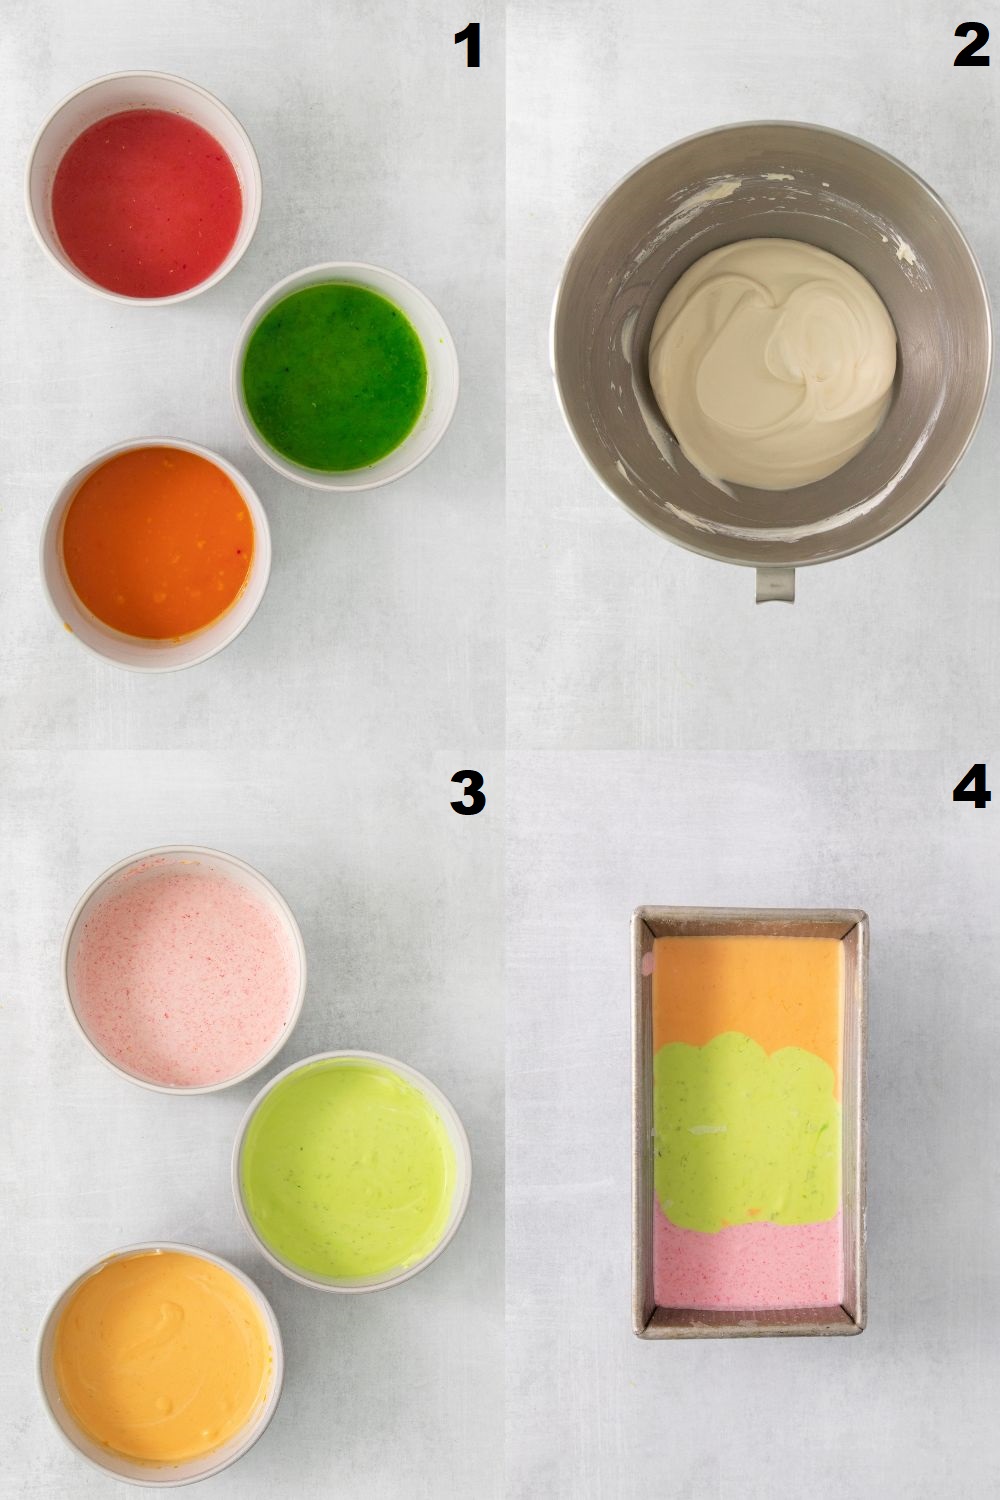 A collage of four images showing the steps for making homemade rainbow sherbet.